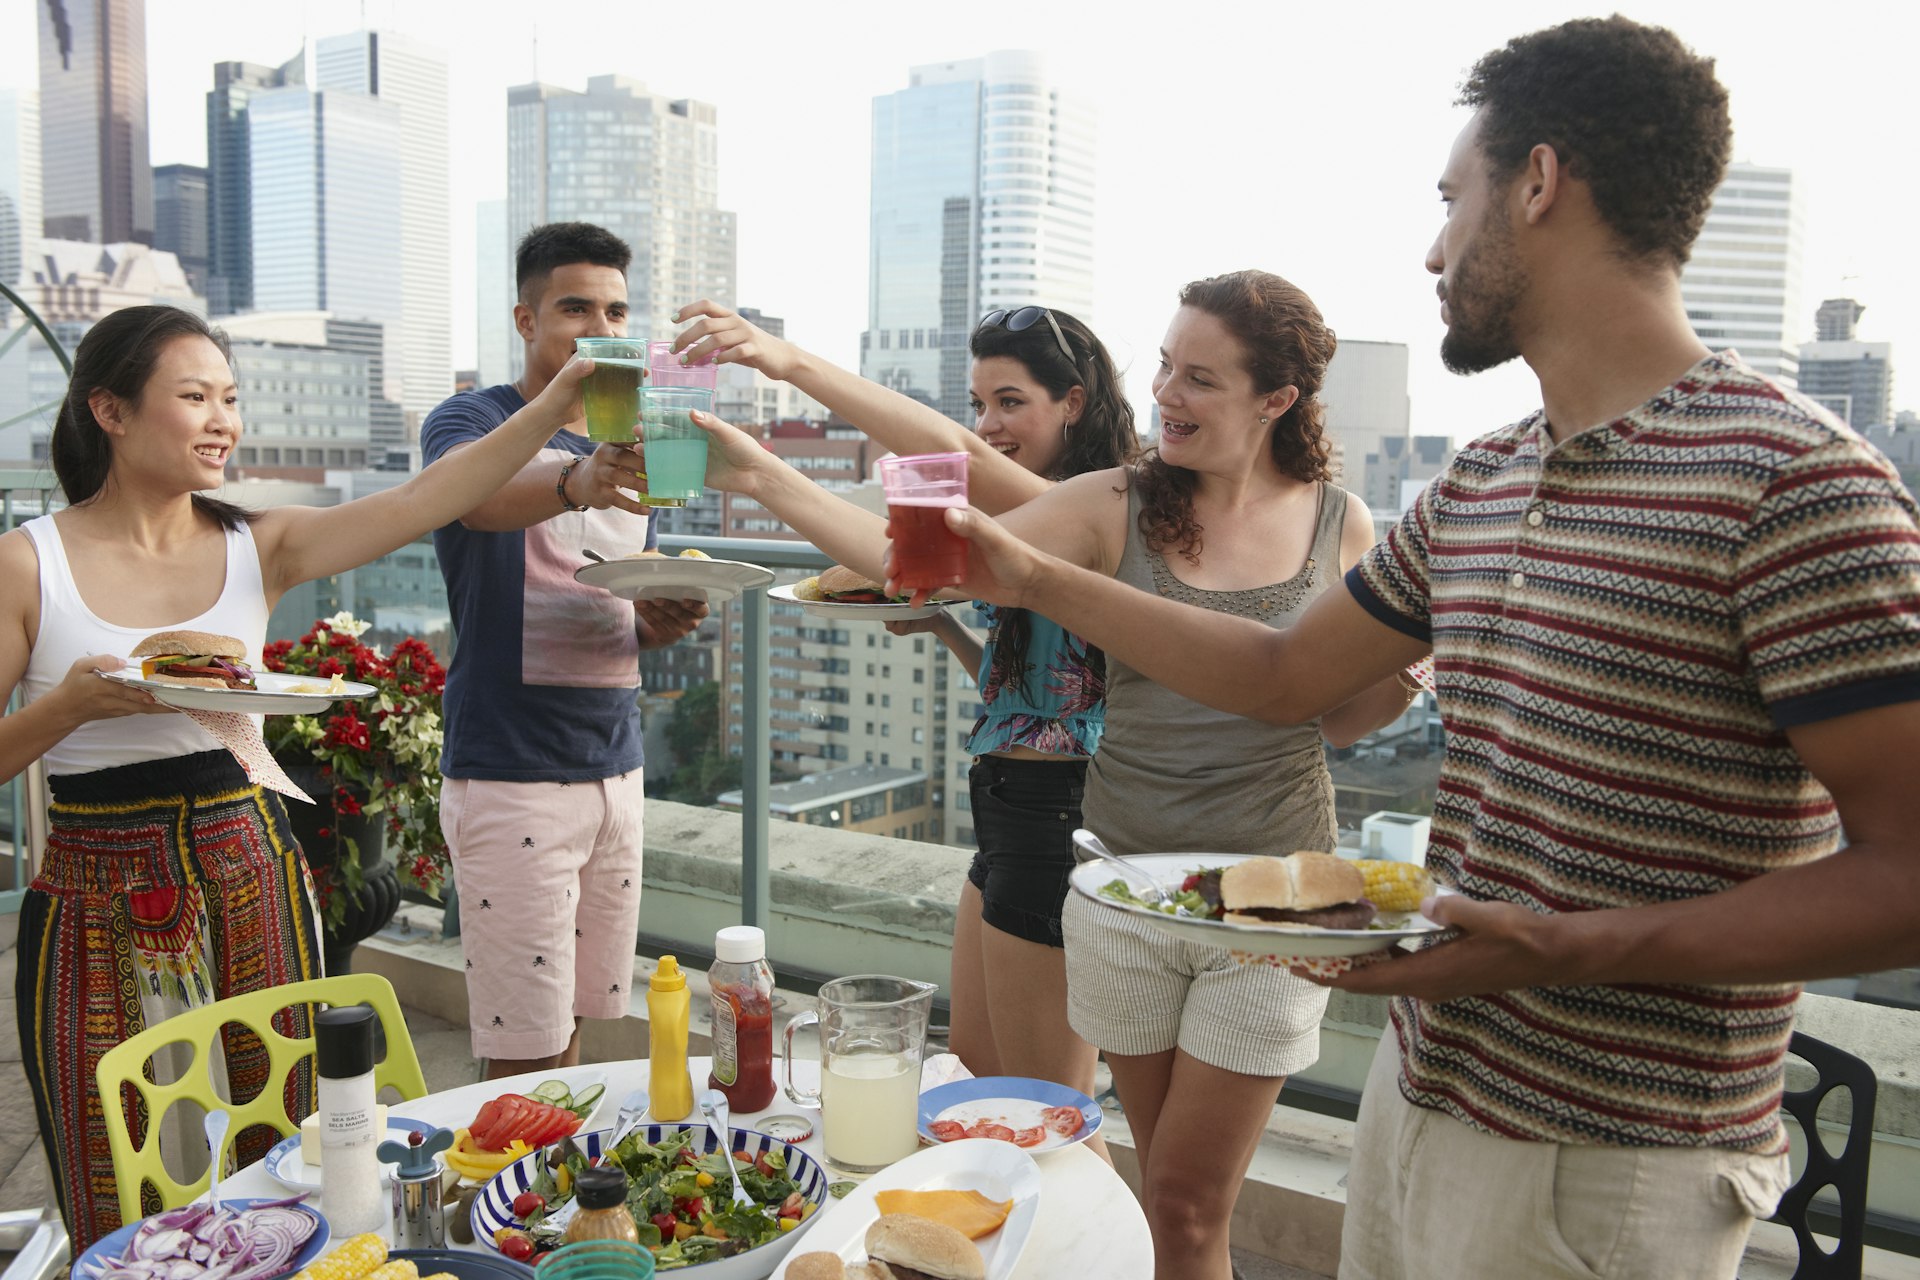 Friends enjoying barbecue on urban rooftop